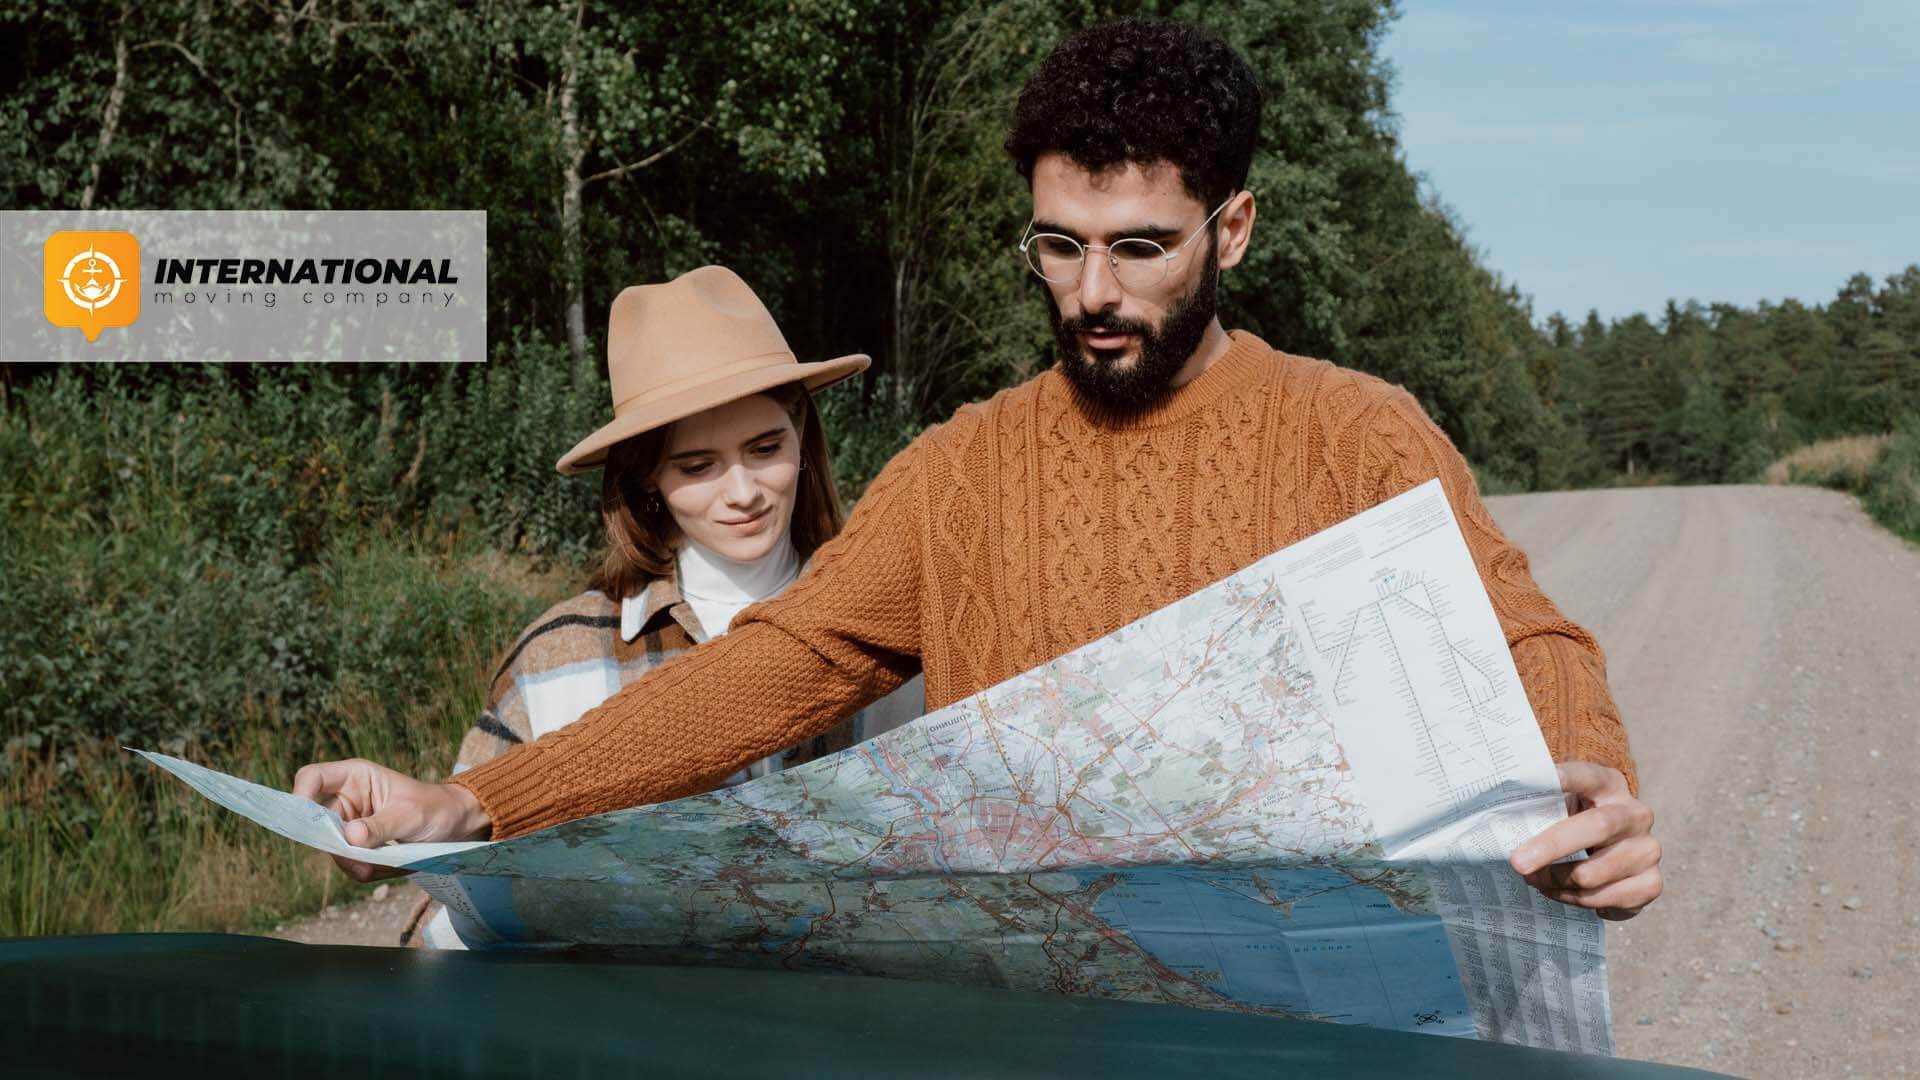 Couple looking at the world map International Moving Company Logo